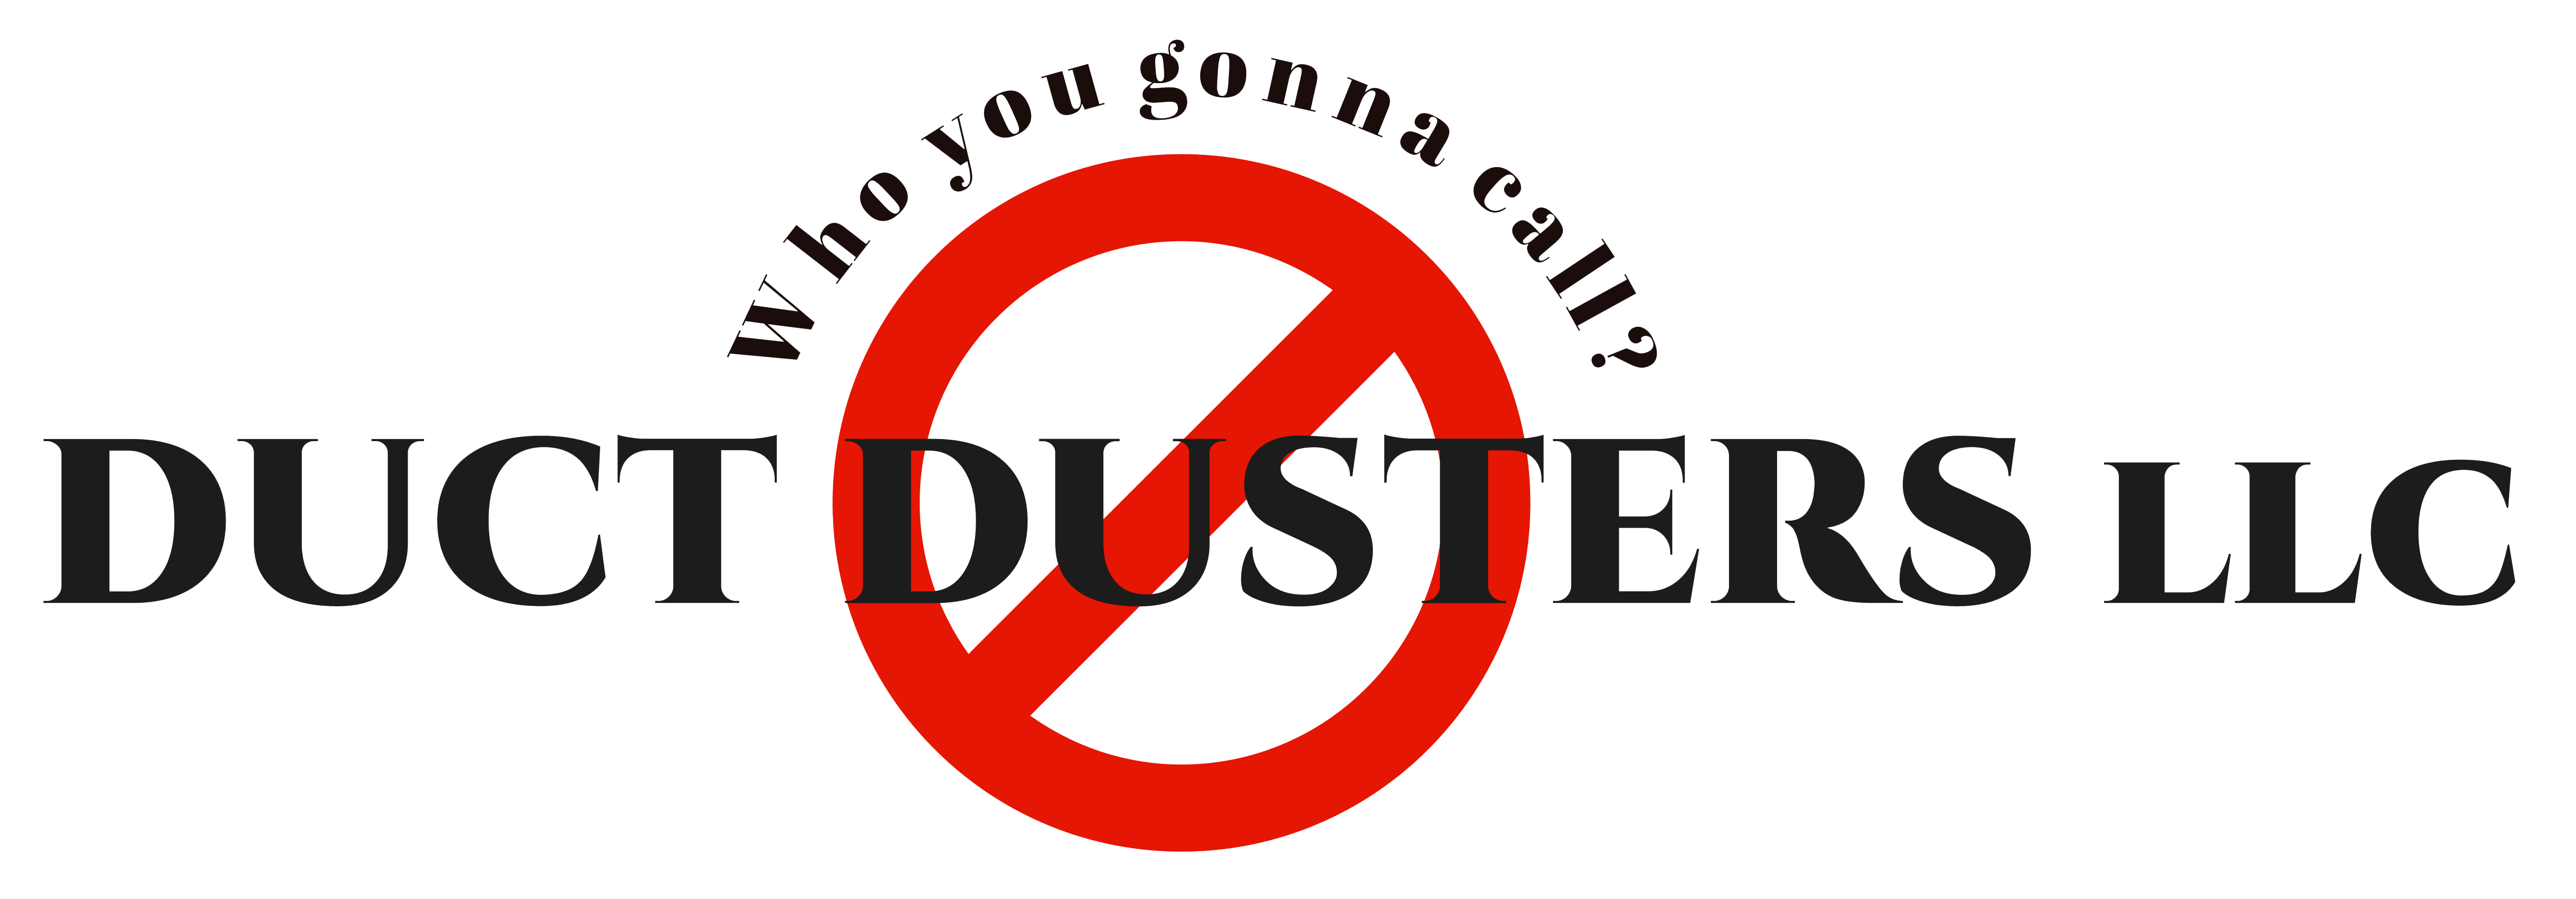 duct dusters logo